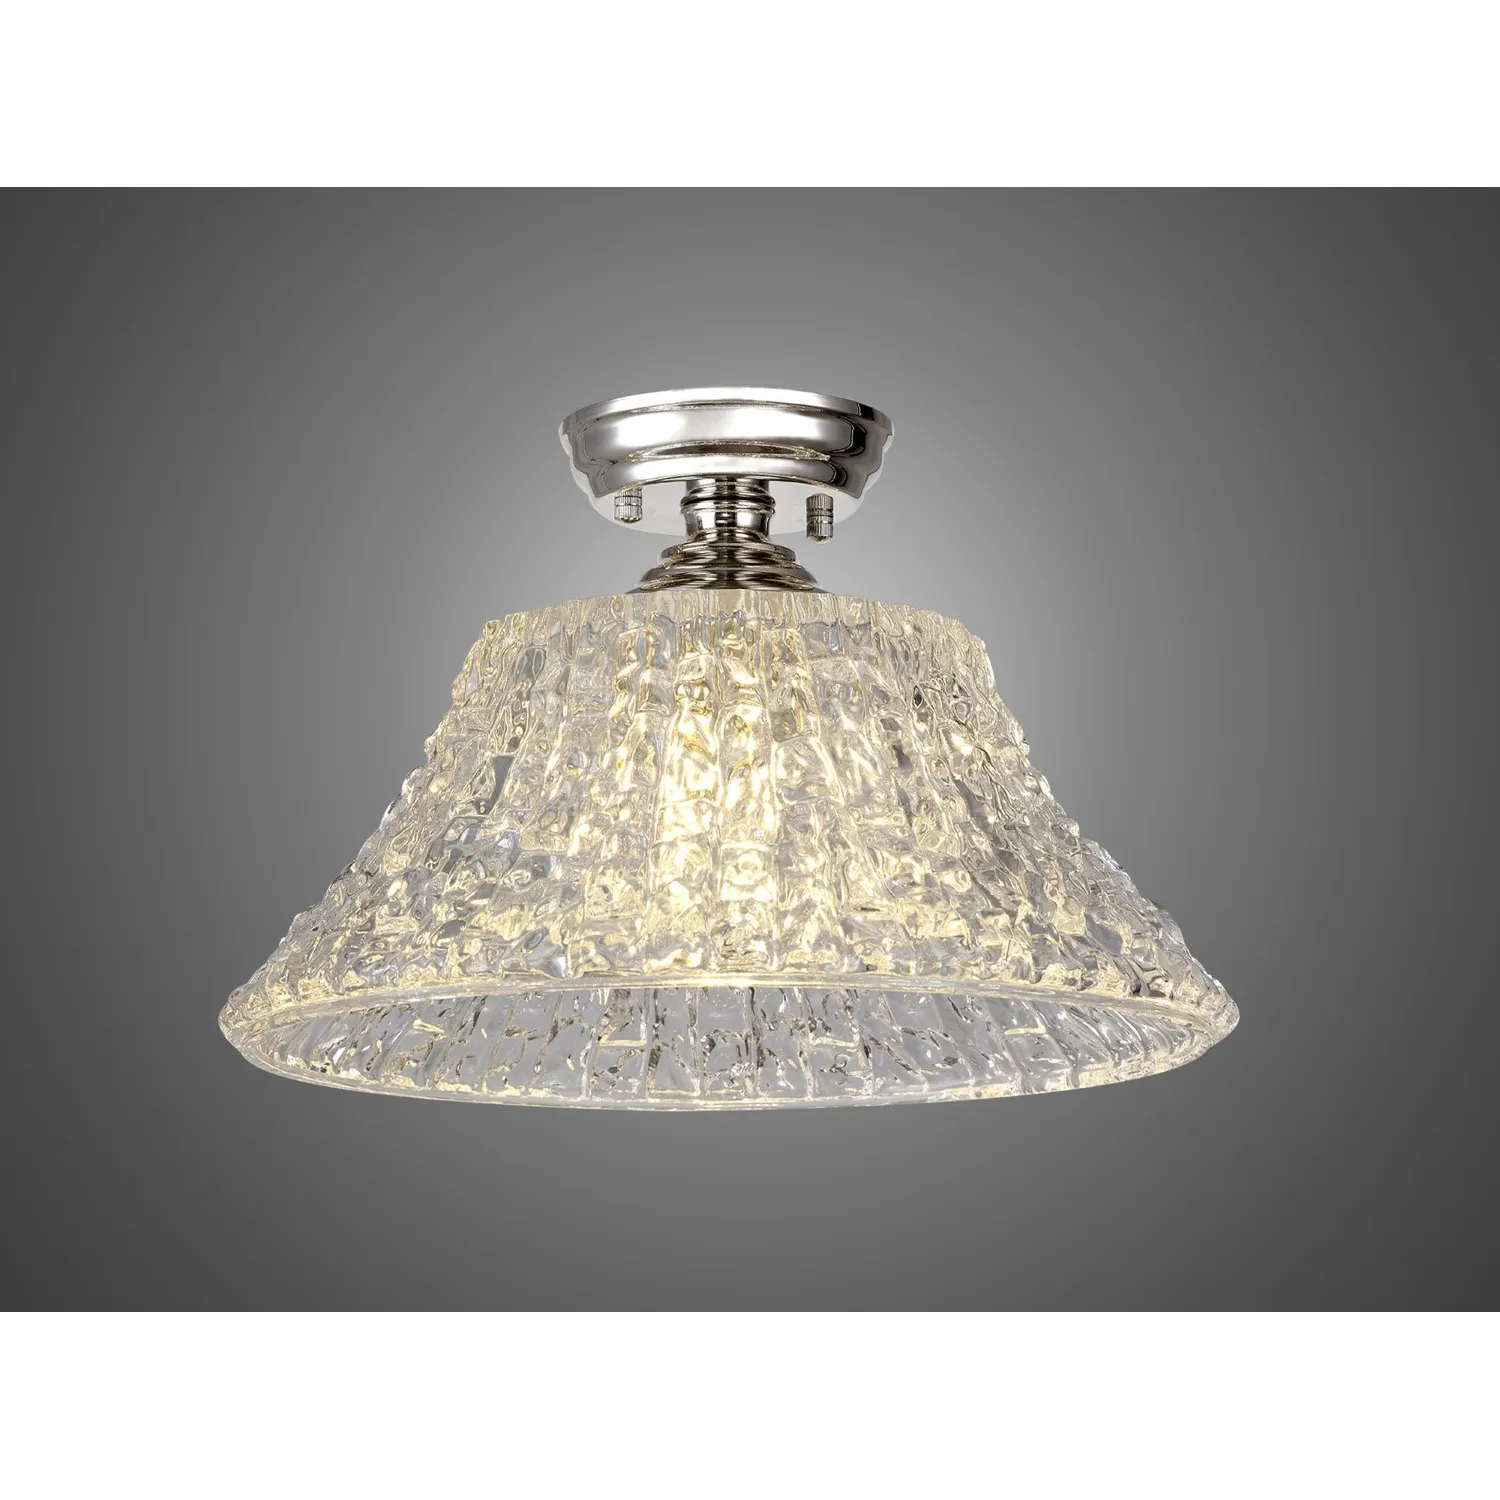 Billericay 1 Light Flush Ceiling E27 With Round 38cm Patterned Glass Shade Polished Nickel Clear